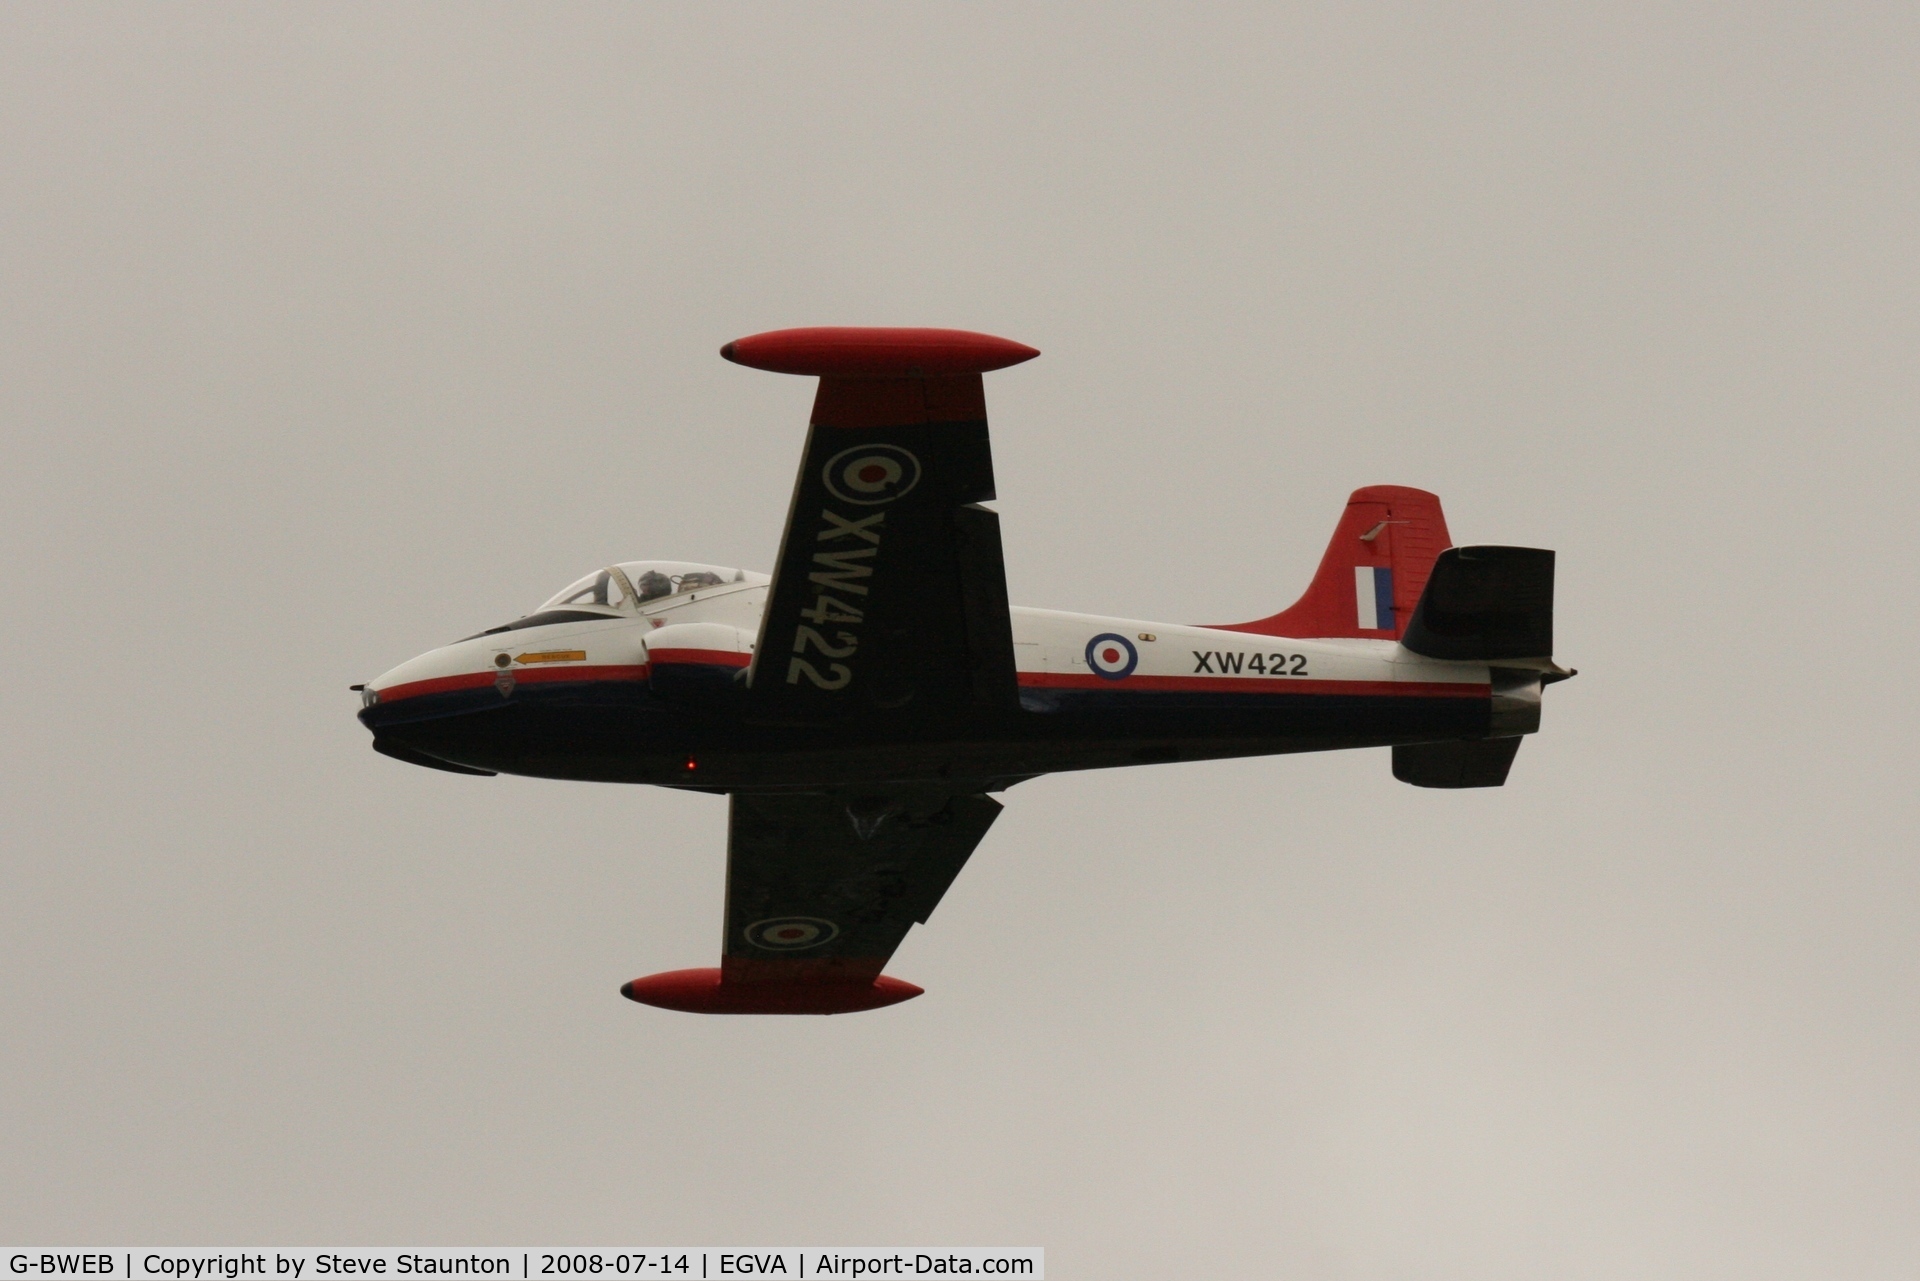 G-BWEB, 1971 BAC 84 Jet Provost T.5A C/N EEP/JP/1044, Taken at the Royal International Air Tattoo 2008 during arrivals and departures (show days cancelled due to bad weather)